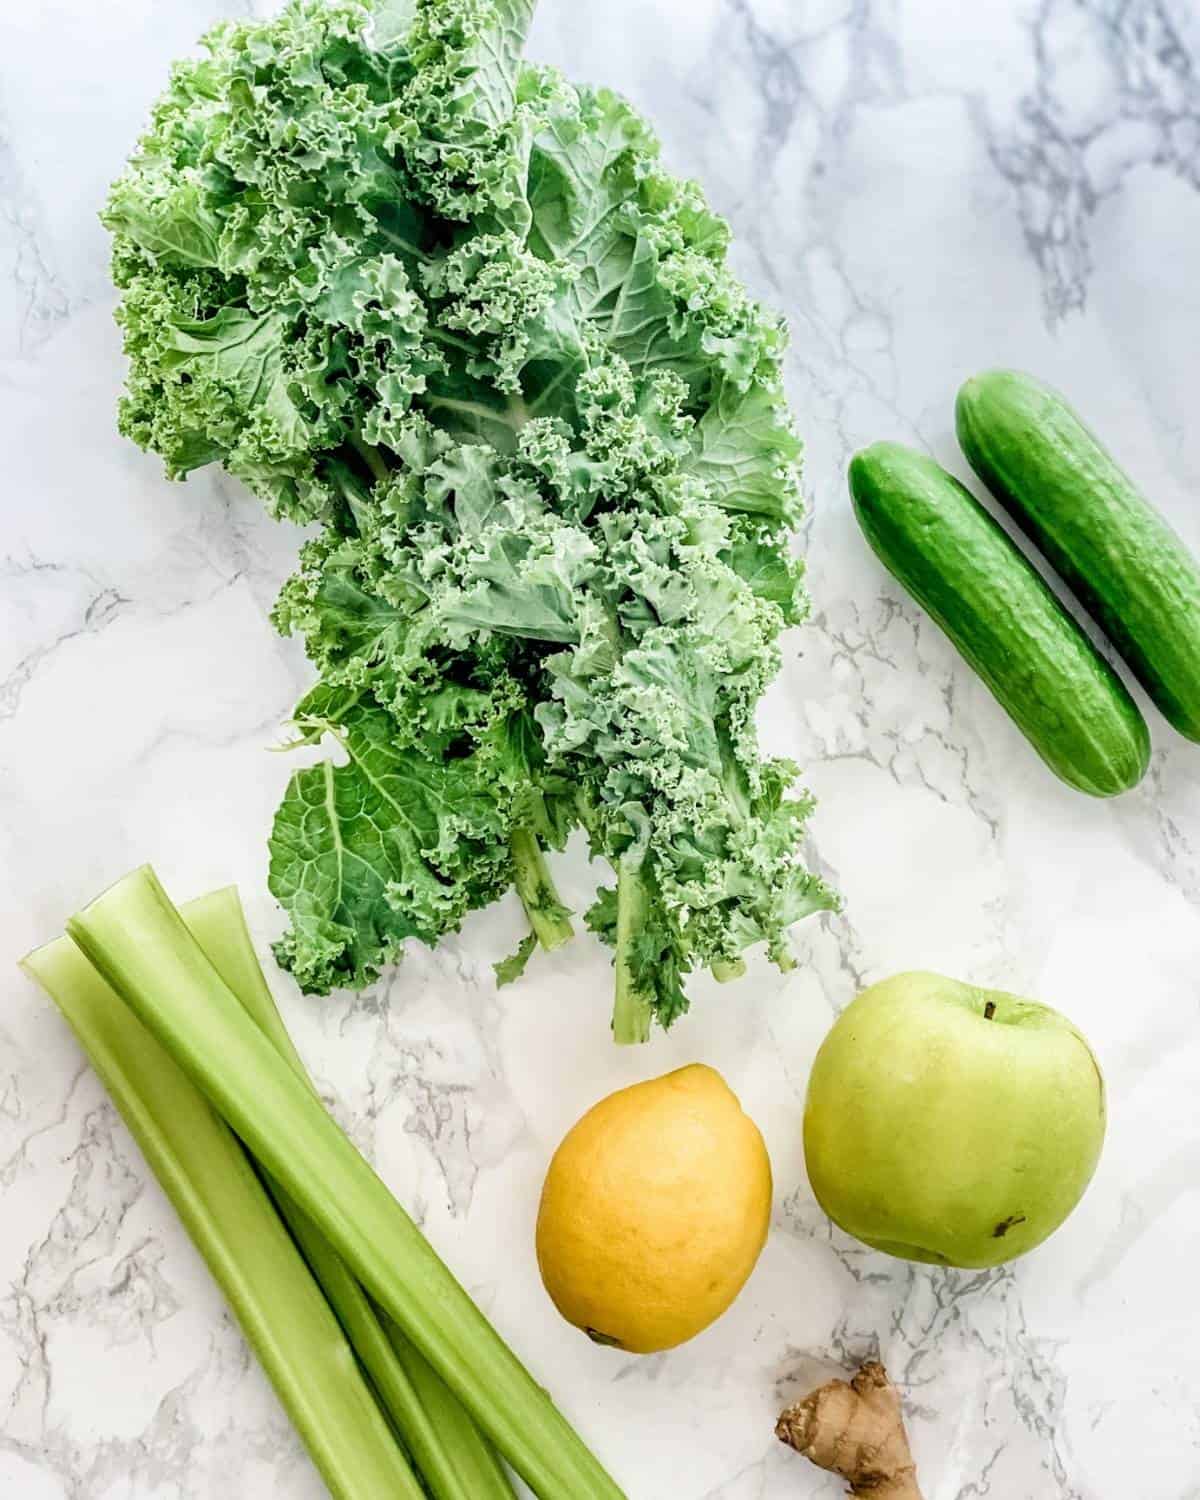 ingredients for making homemade green juice in a blender